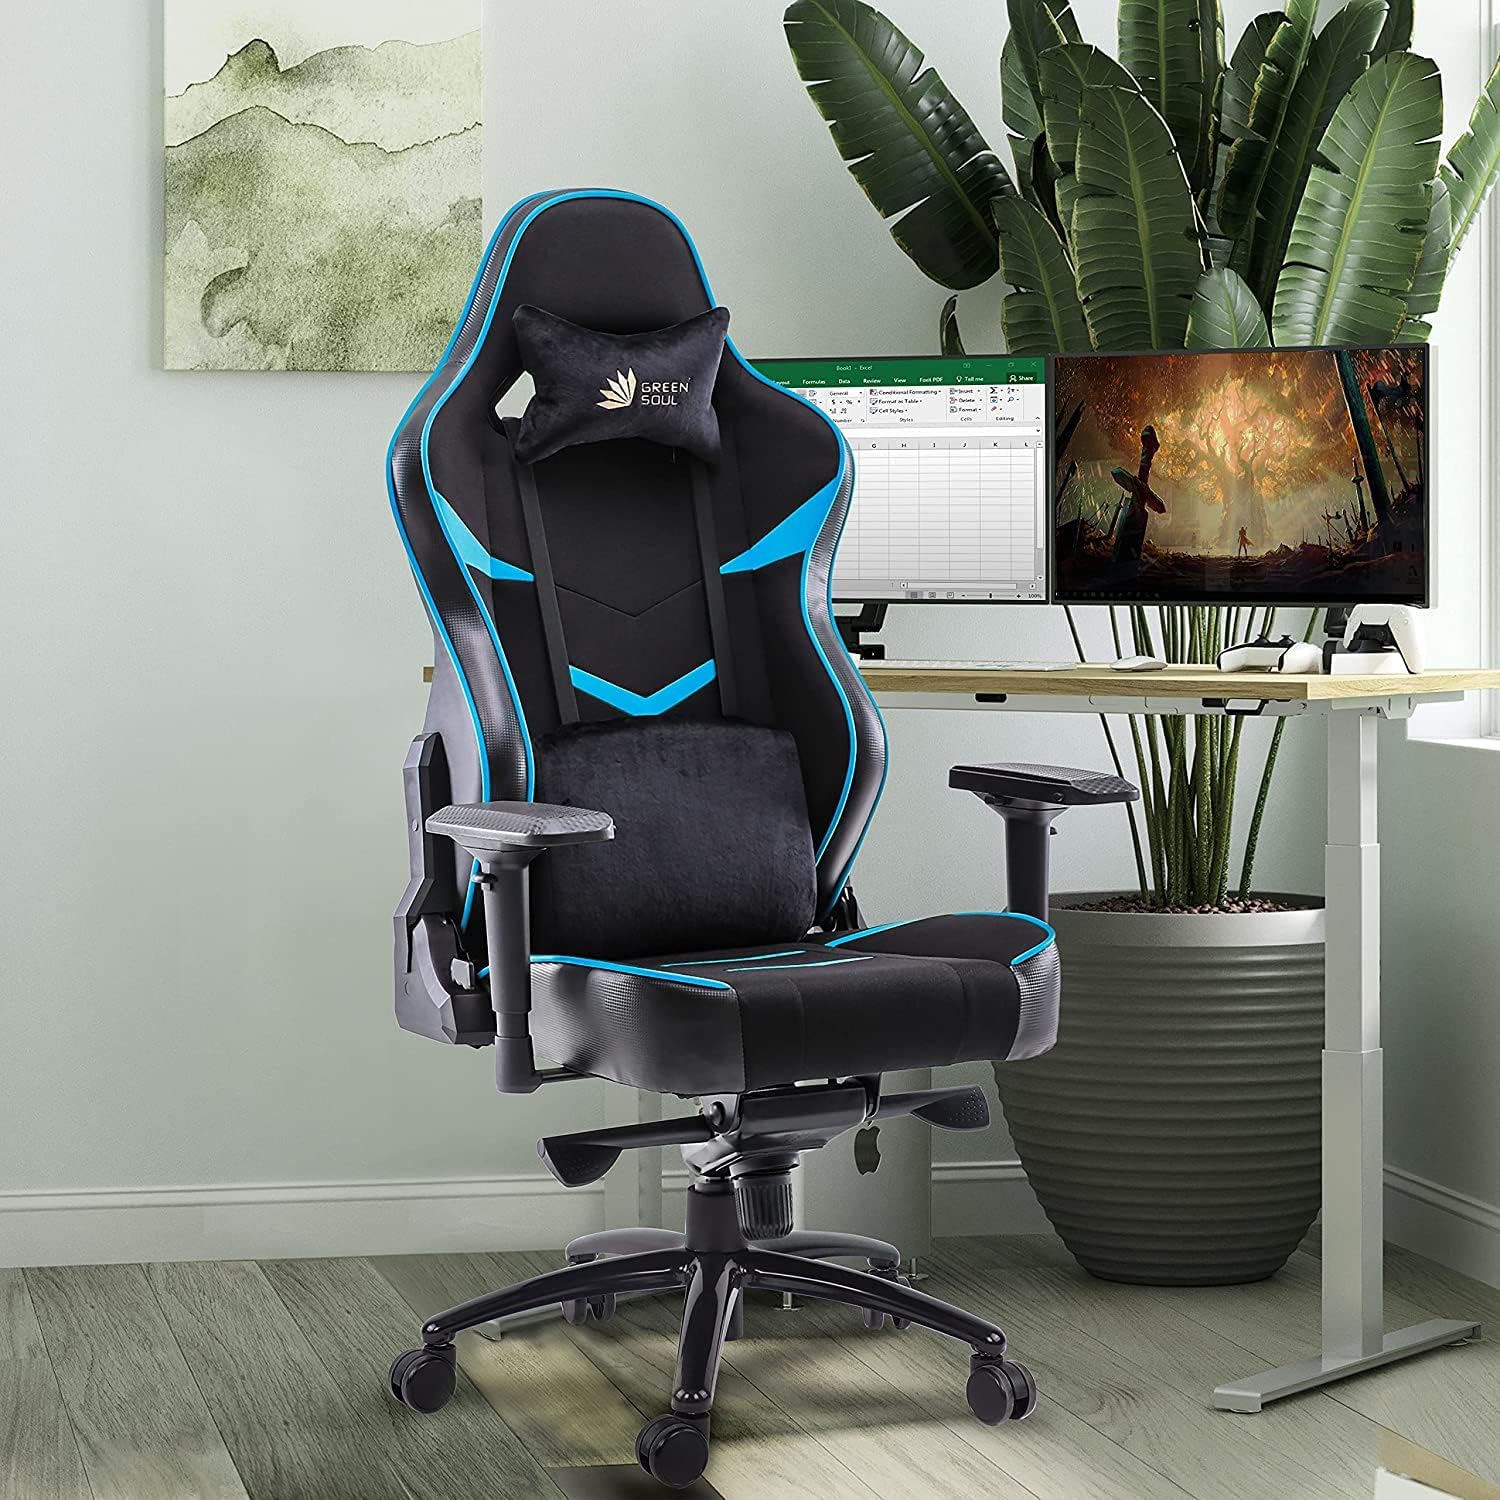 Dr Luxur OVERPOWER Series Gaming Chair for Gaming, Home Office and Study- Perfect For Work From Home with Lumbar Support, 2-D Armrest, Footrest and 180 Degree Recline, and Multi Locking Position (OverPower)